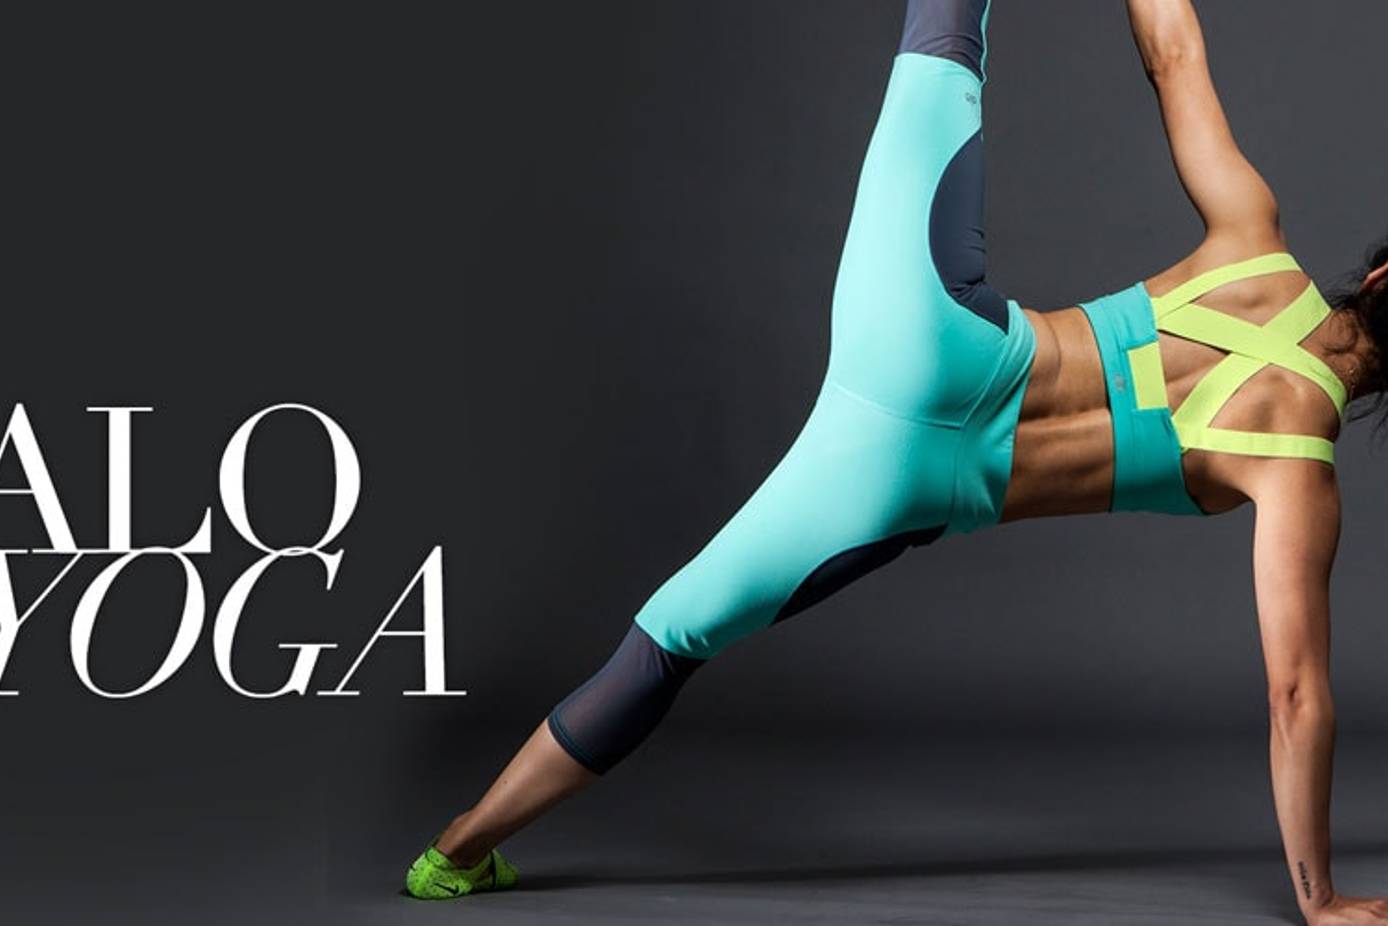 Alo Yoga set to open its first flagship